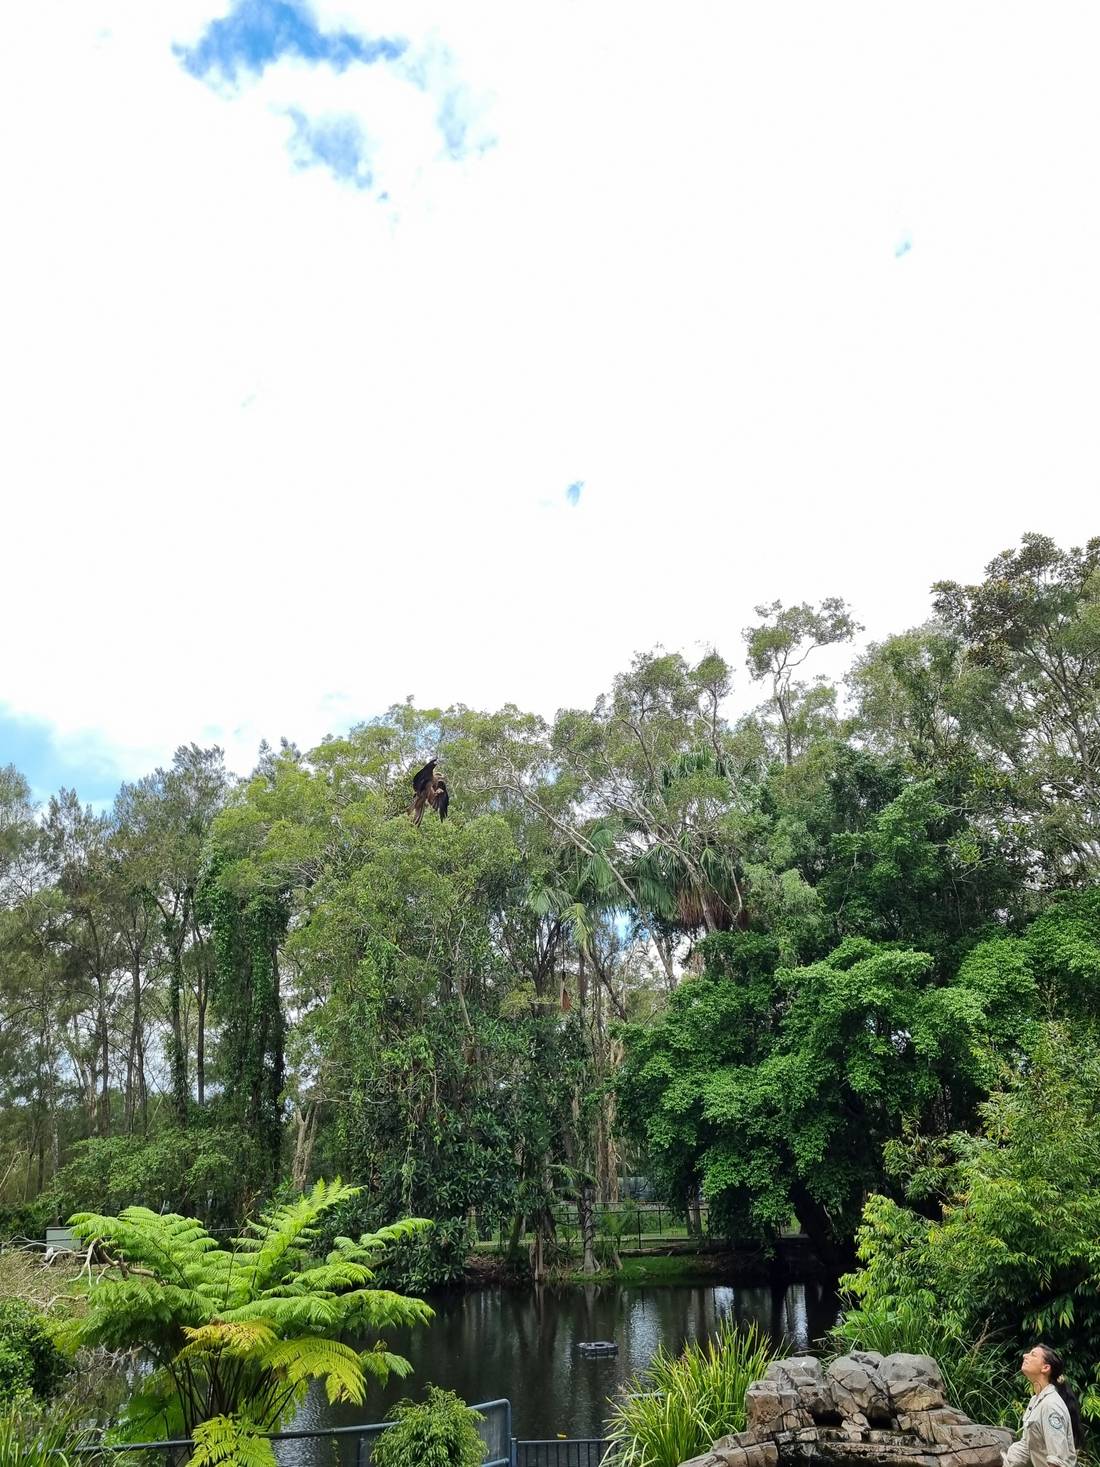 A Hawk (centre of photo) swooping to catch a treat thrown up by the handler (bottom right corner of photo) during the bird show.